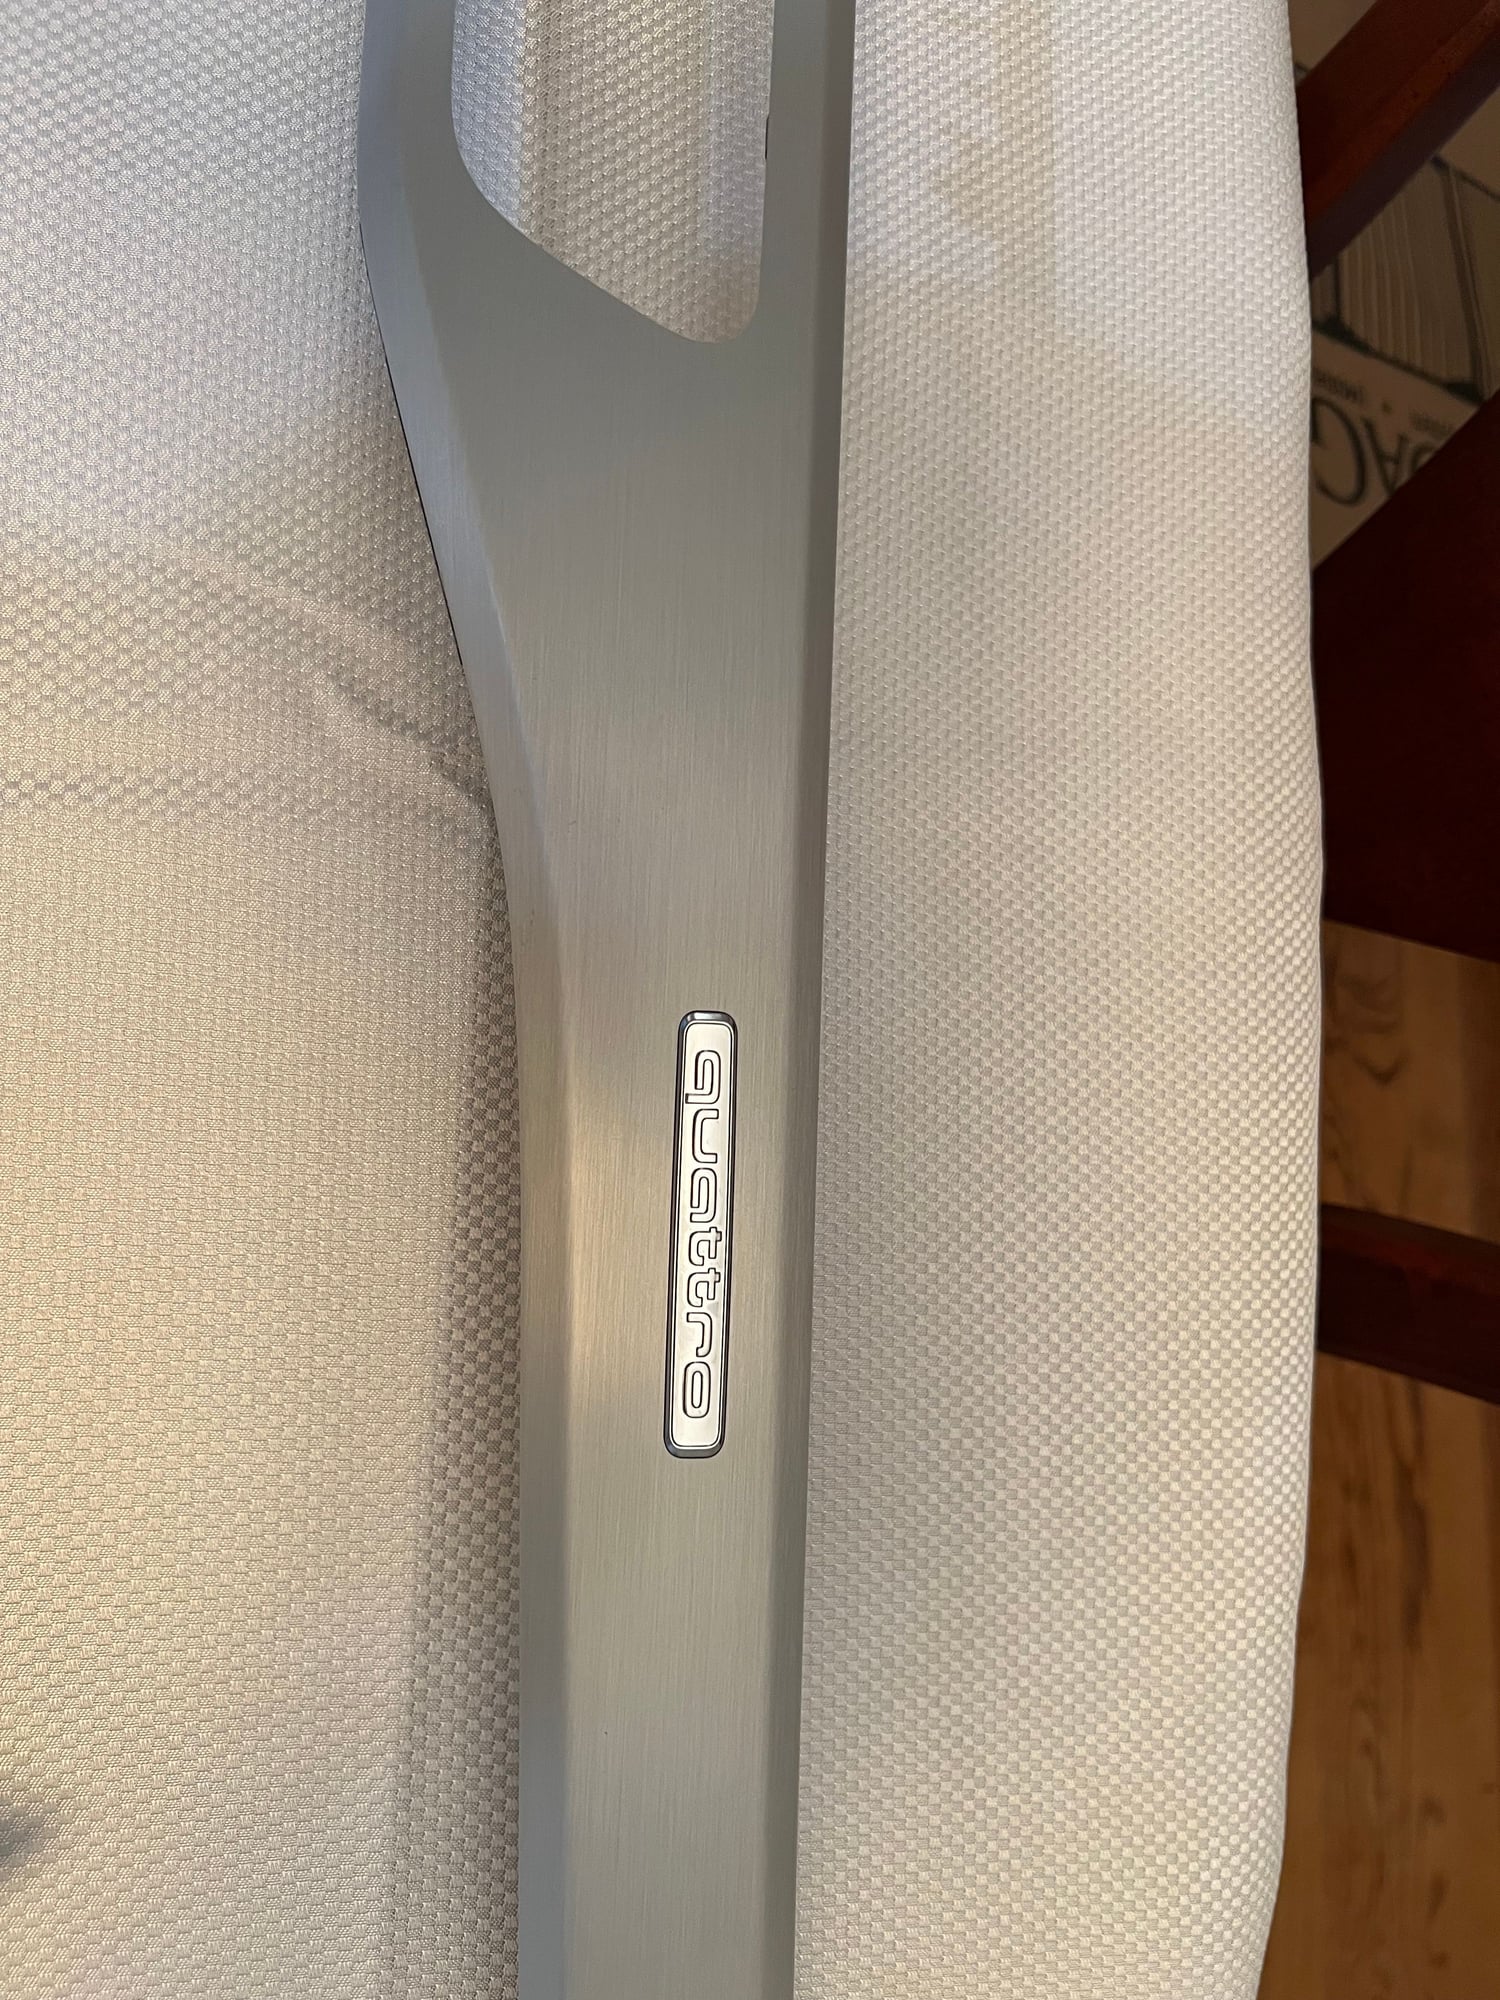 Interior/Upholstery - New 2023 (B9) A5/S5 Sportback brushed aluminum inlays interior trim - New - 2017 to 2024 Audi A5 - Vienna, VA 22181, United States